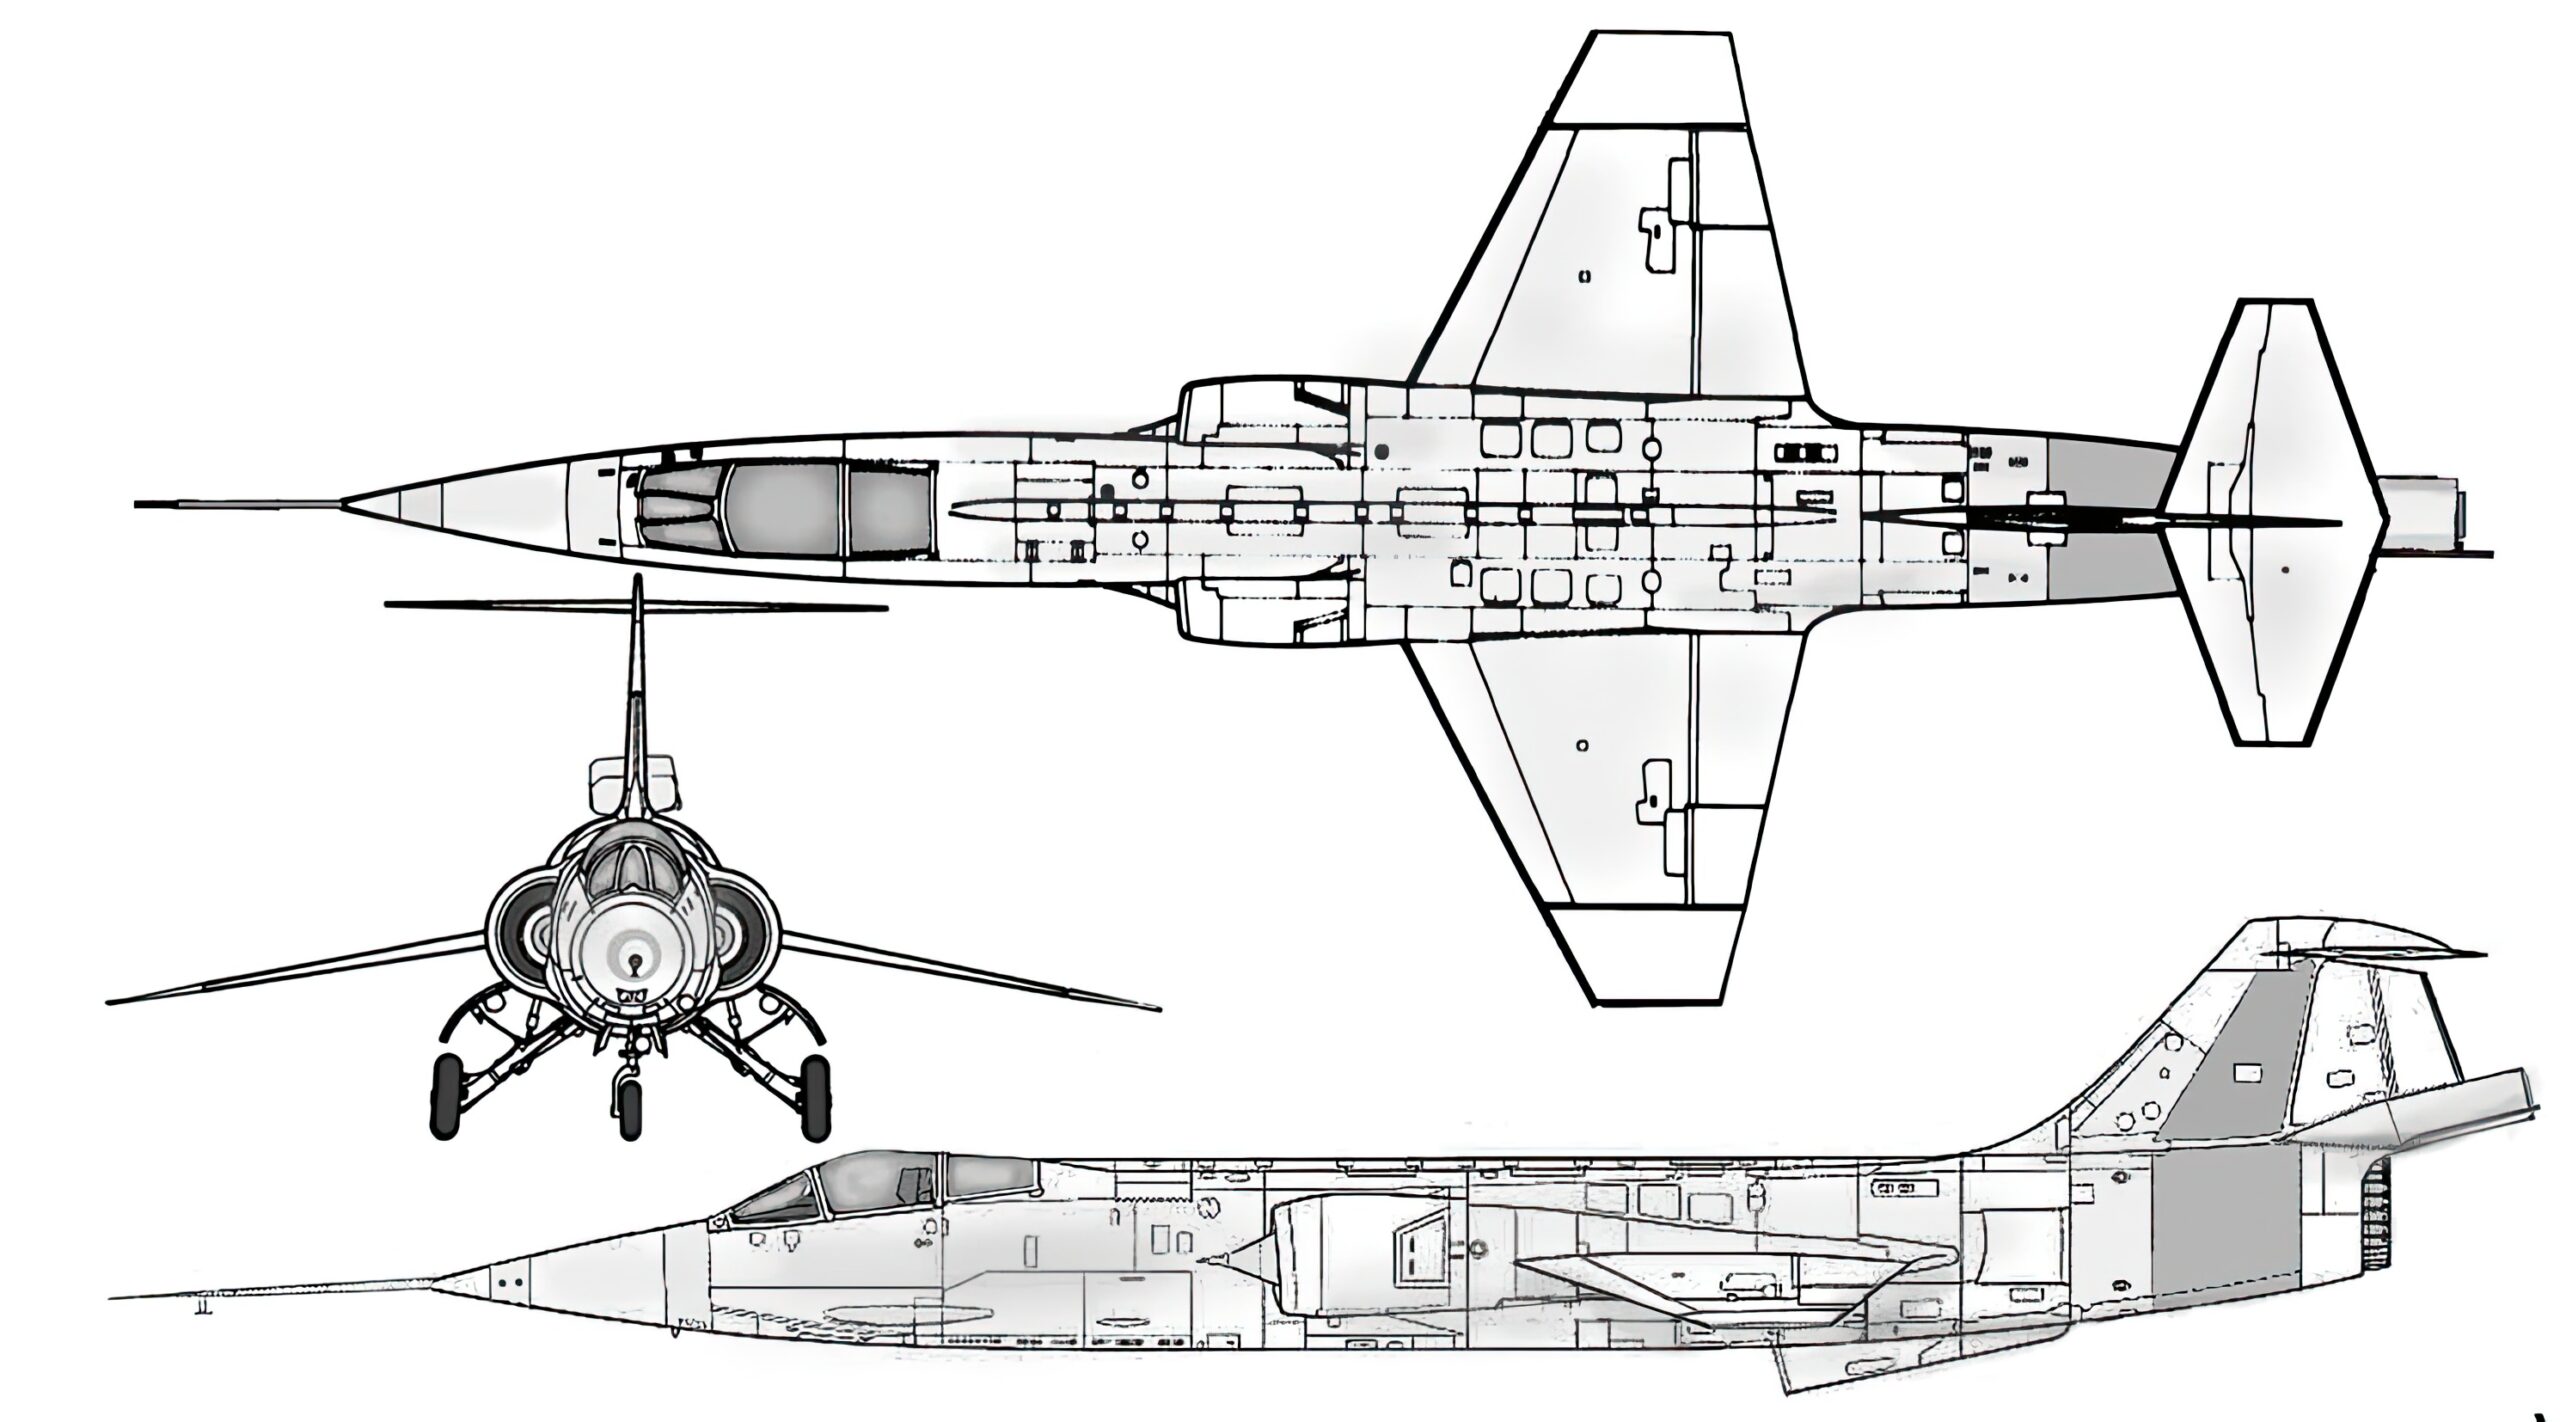 Three-view drawing of the Lockheed NF-104 Starfighter